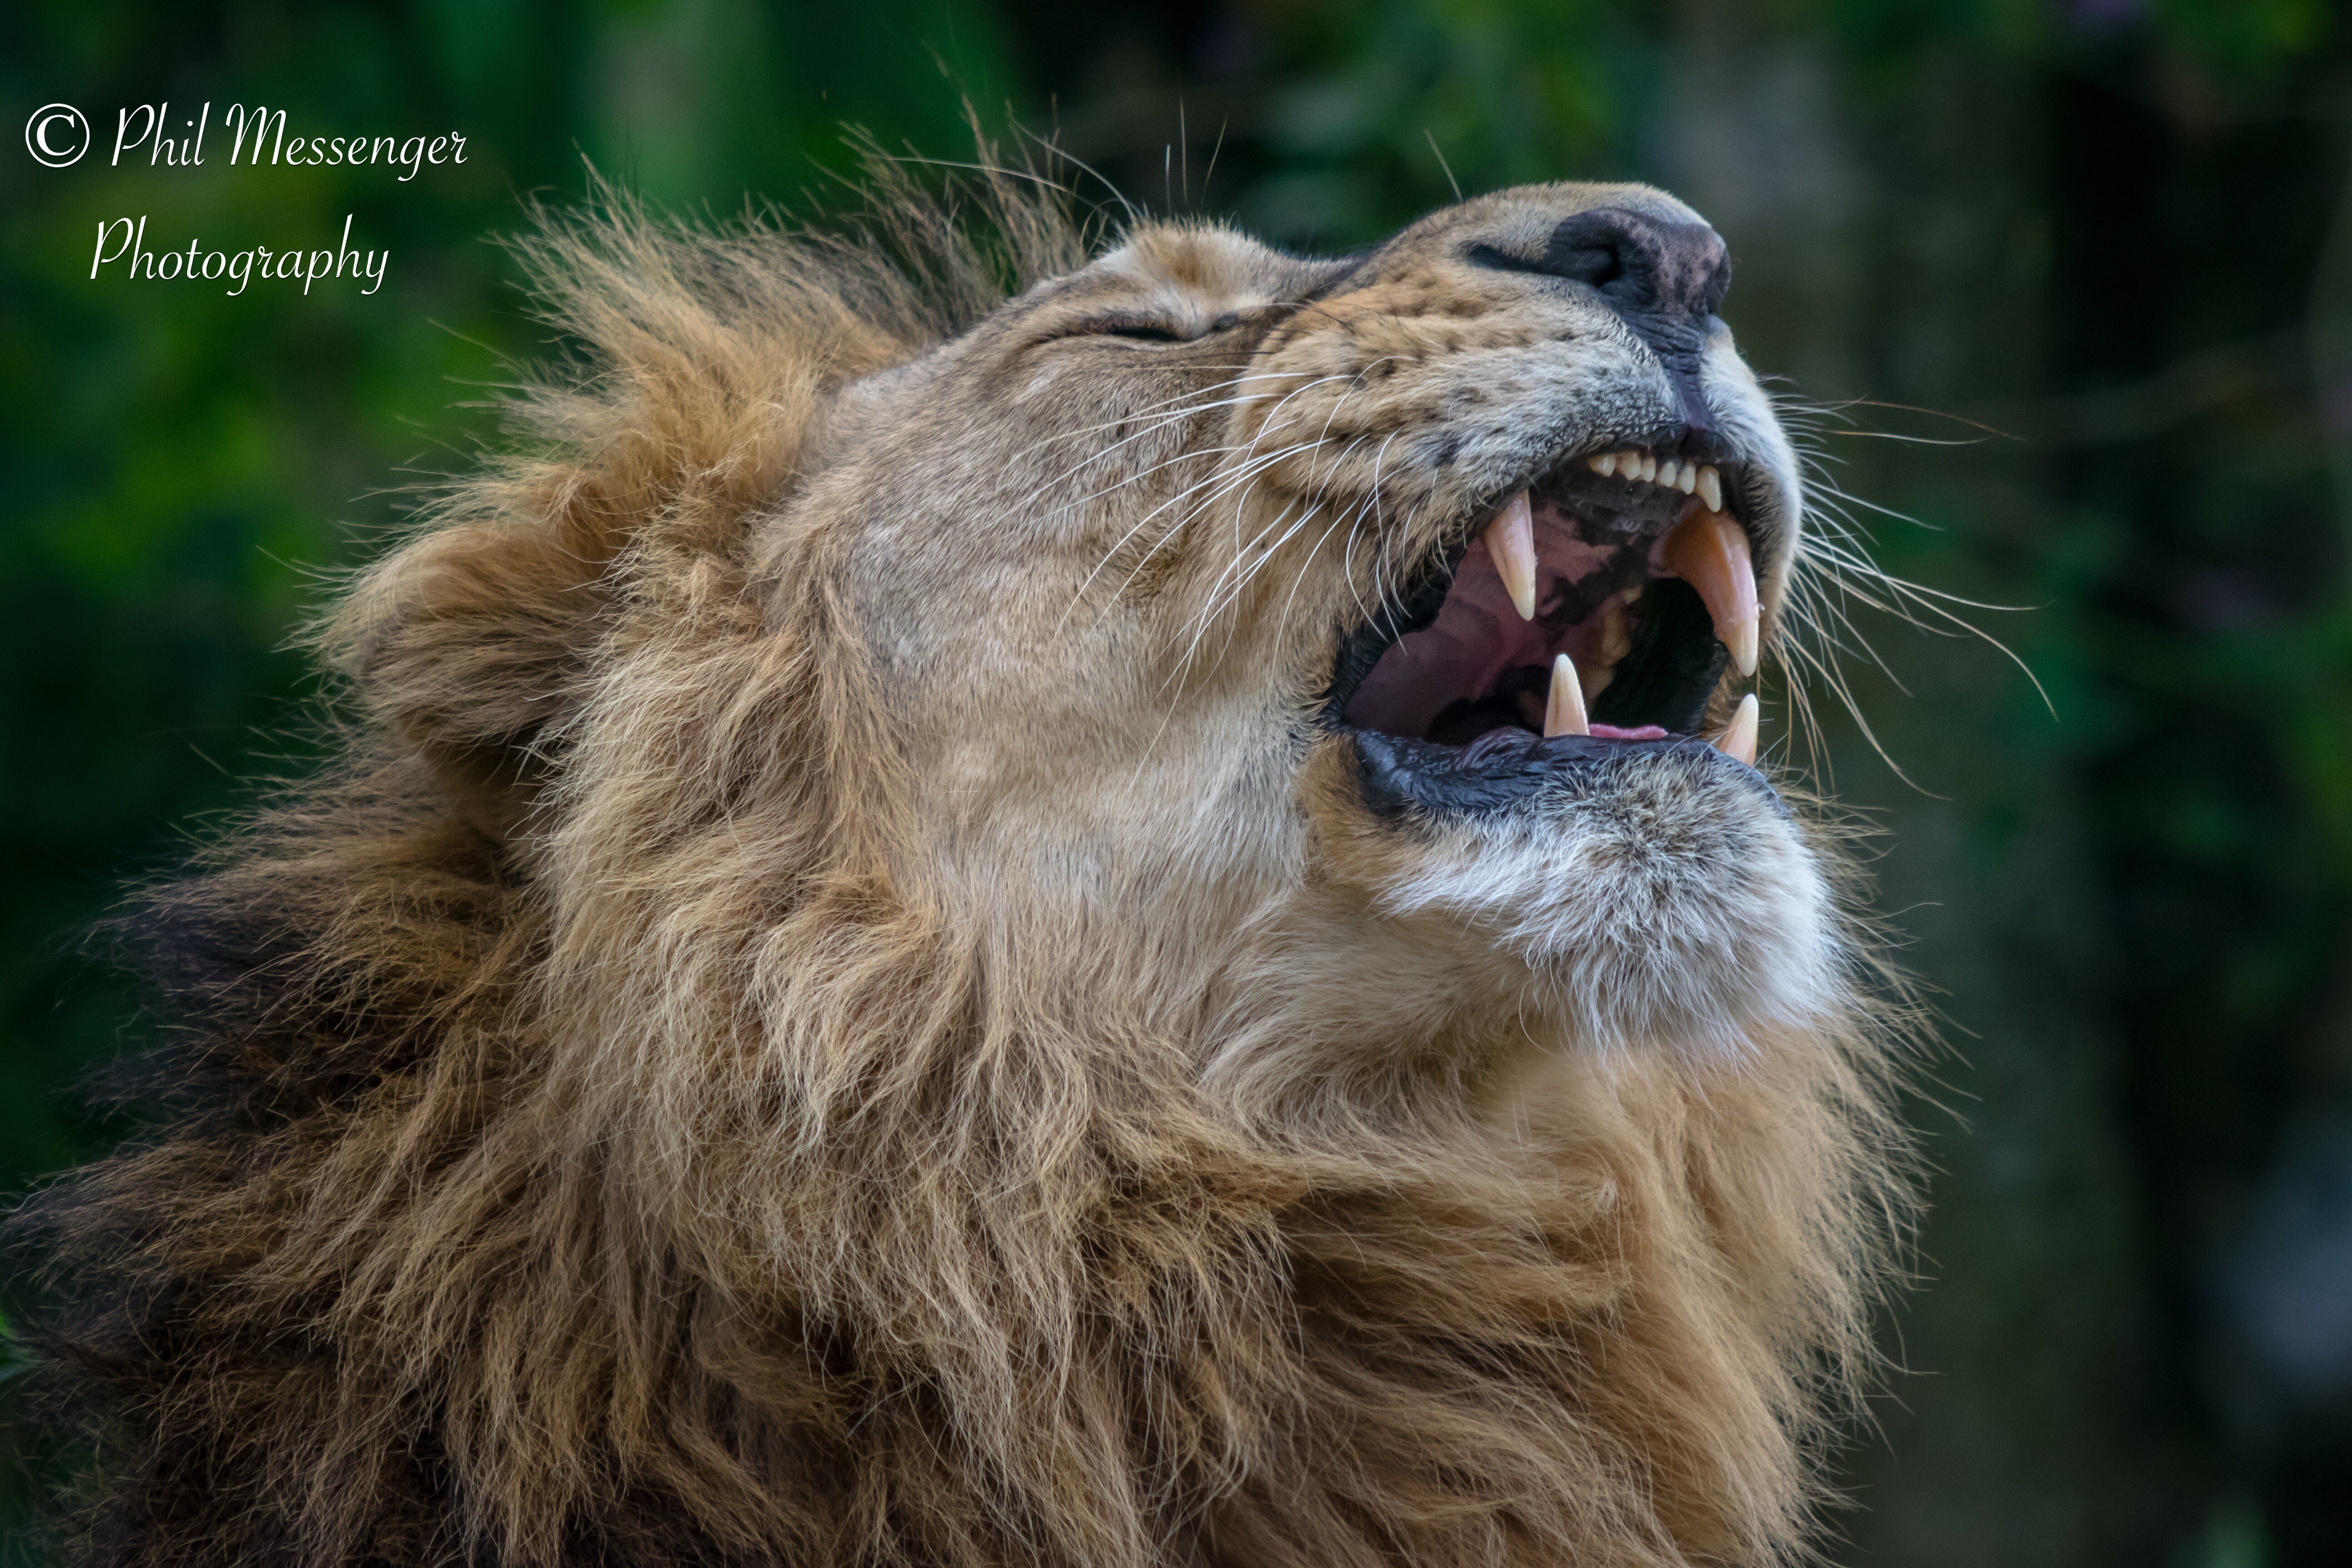 A male Asiatic lion (Panthera leo persicus) taken at Cotswold wildlife park, Burford, Oxfordshire.